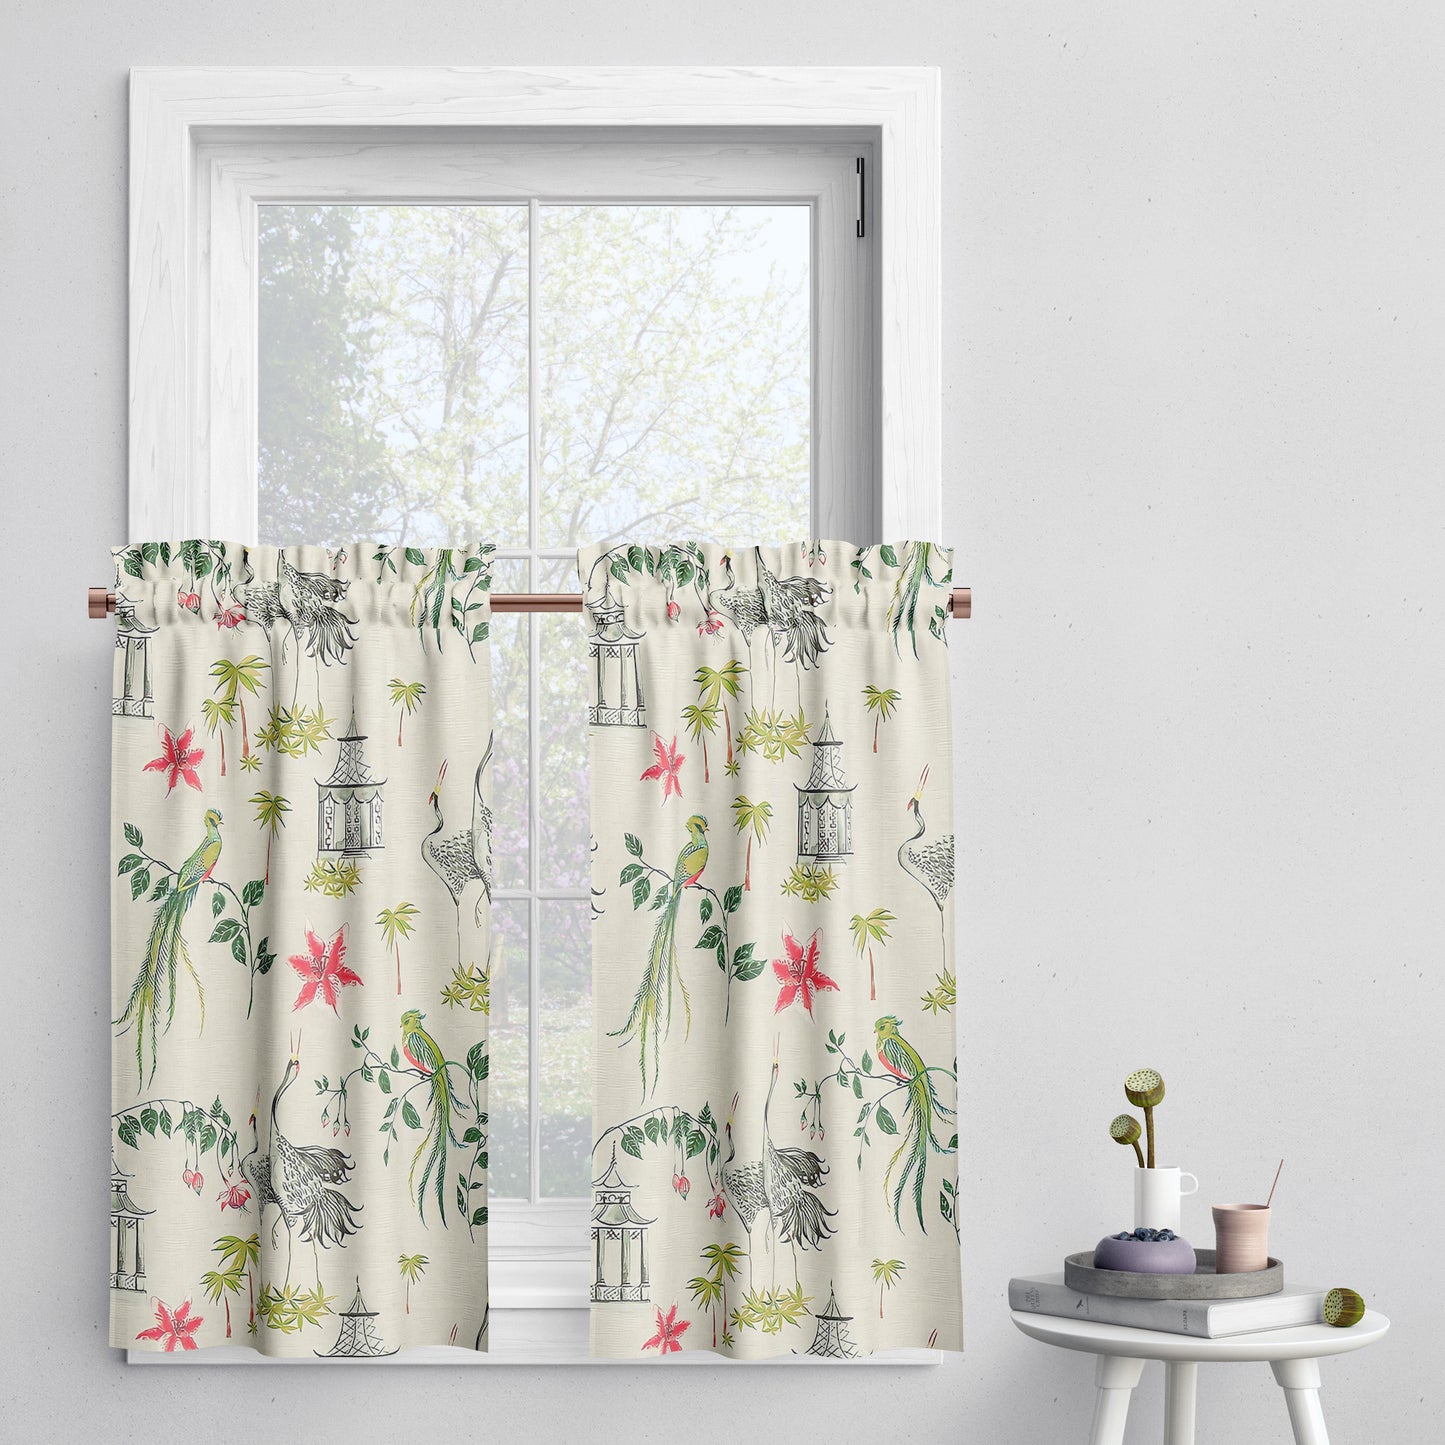 Tailored Tier Cafe Curtain Panels Pair in Let It Crane Avocado Oriental Toile, Multicolor Chinoiserie